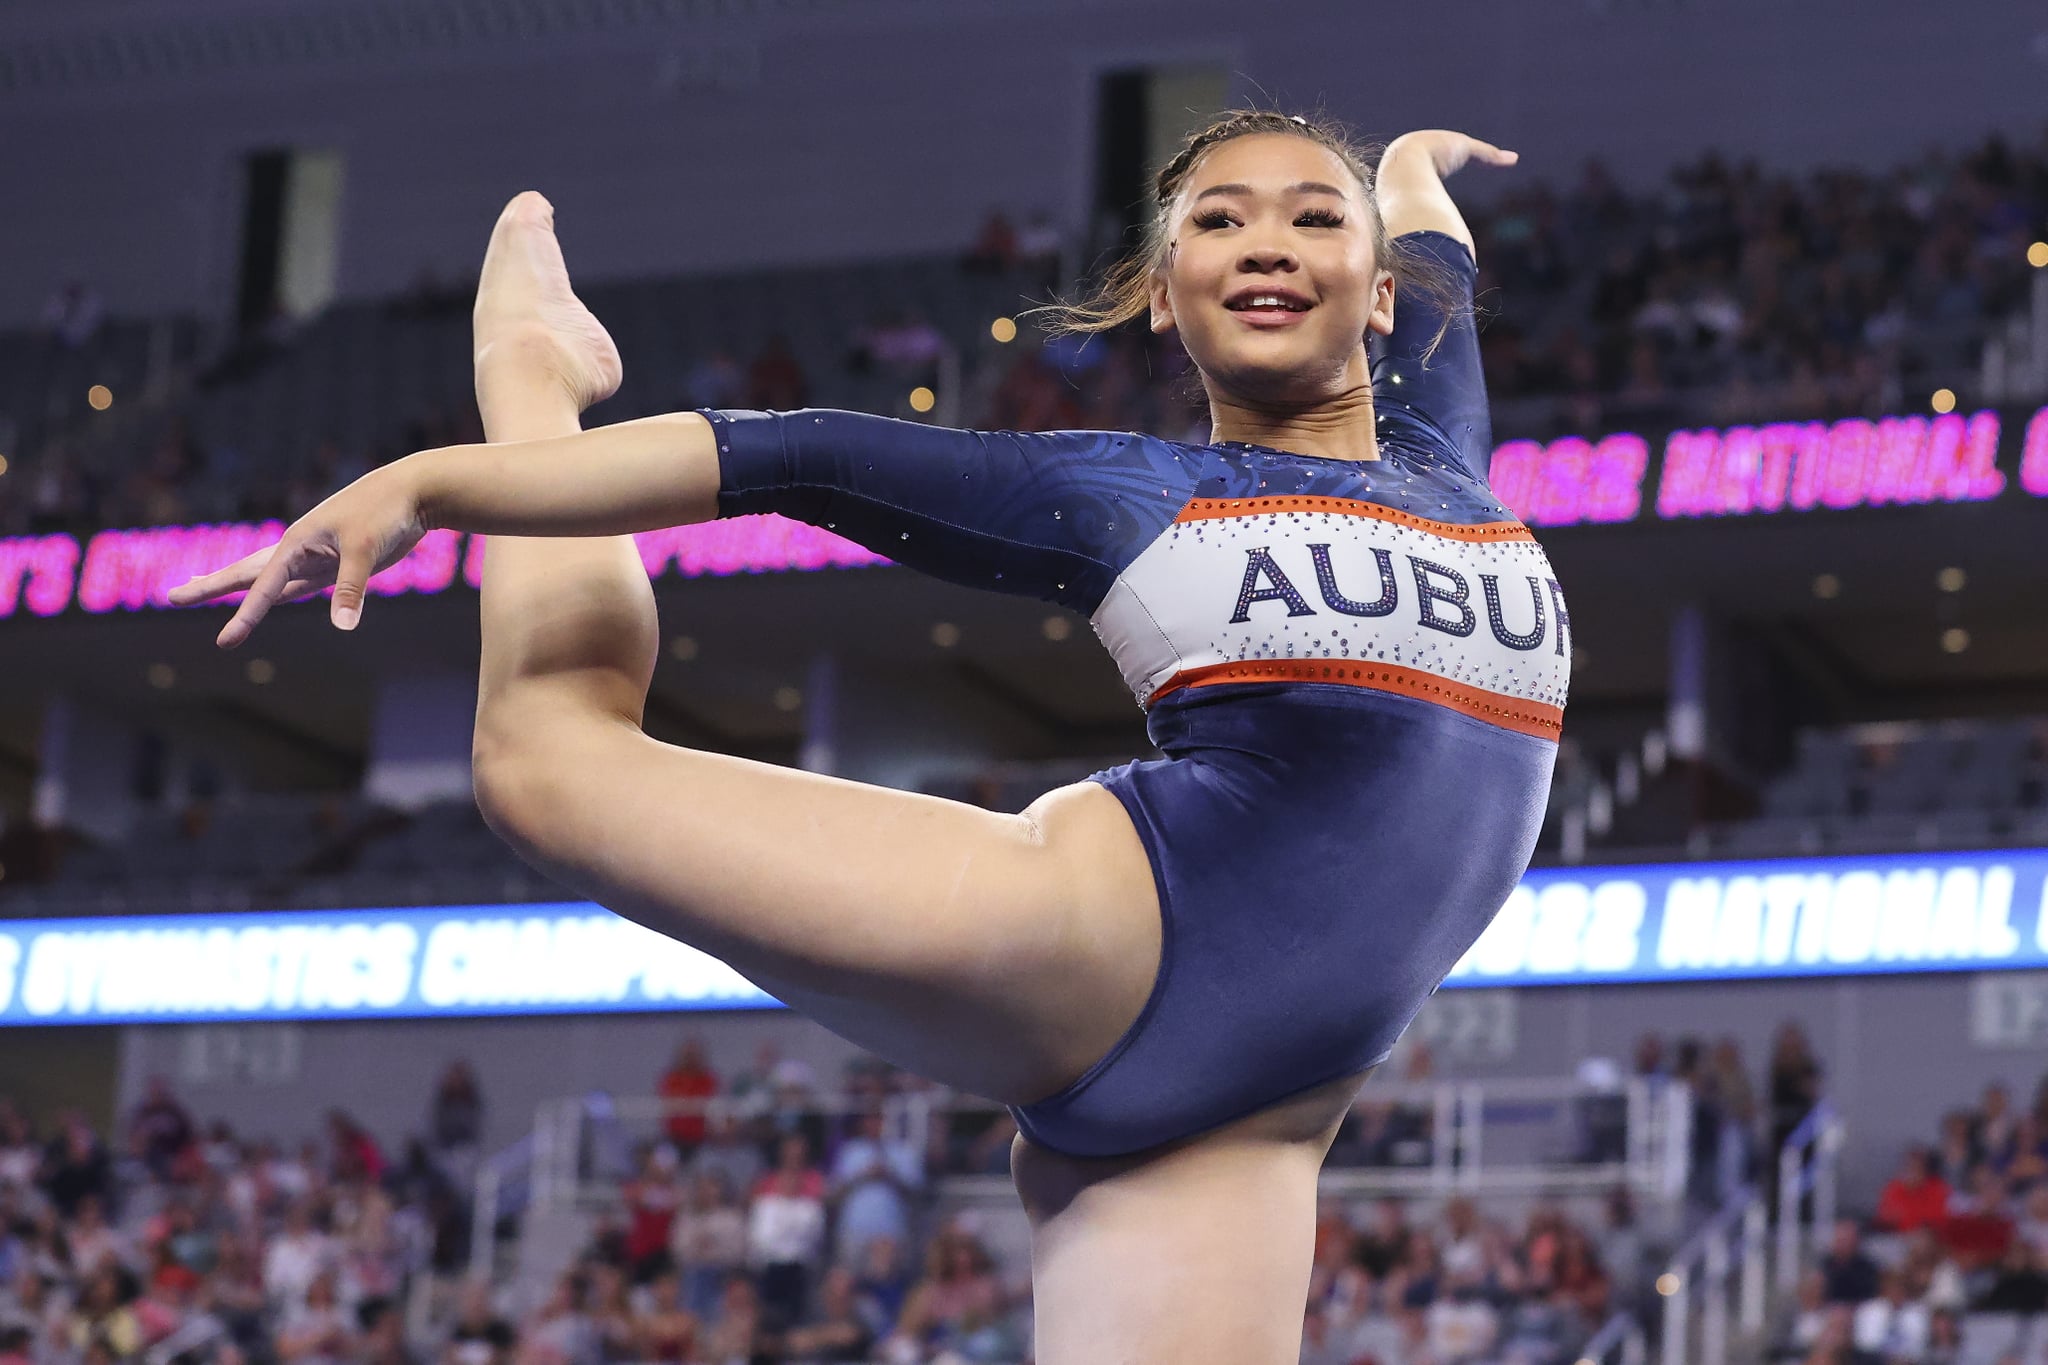 FORT WORTH, TX - APRIL 16: Sunisa Lee of the Auburn Tigers competes in the floor exercise during the Division I Womens Gymnastics Championship held at Dickies Arena on April 16, 2022 in Fort Worth, Texas. (Photo by C. Morgan Engel/NCAA Photos via Getty Images)